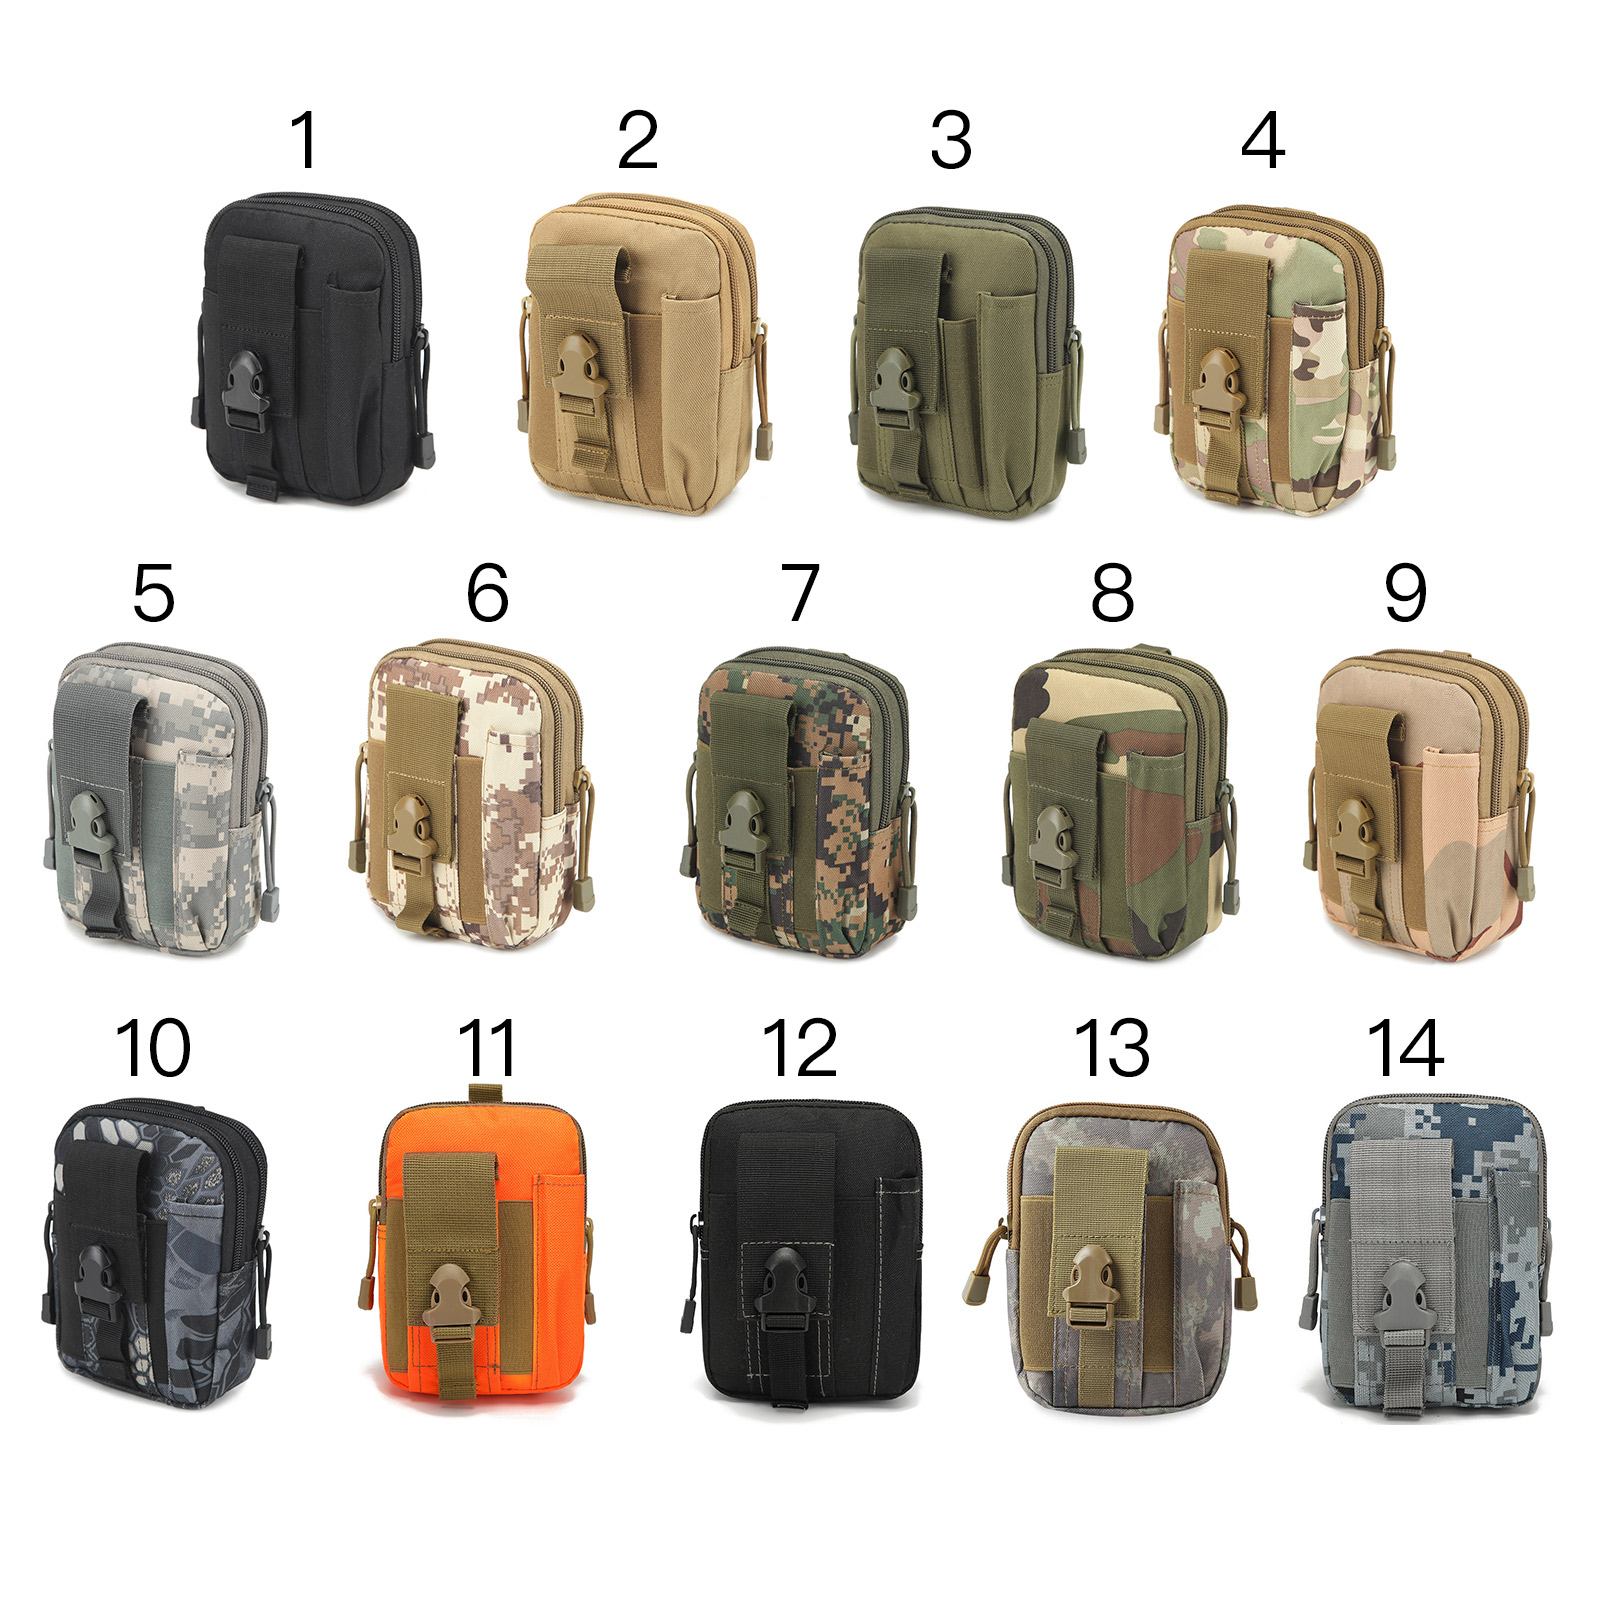 Sugeryy Mobile Phone Bag Pouch Belt Sling Chest Pack Hiking Outdoor Multi-Functional Camo Travel Camping Bags Tactical Backpack - image 4 of 5